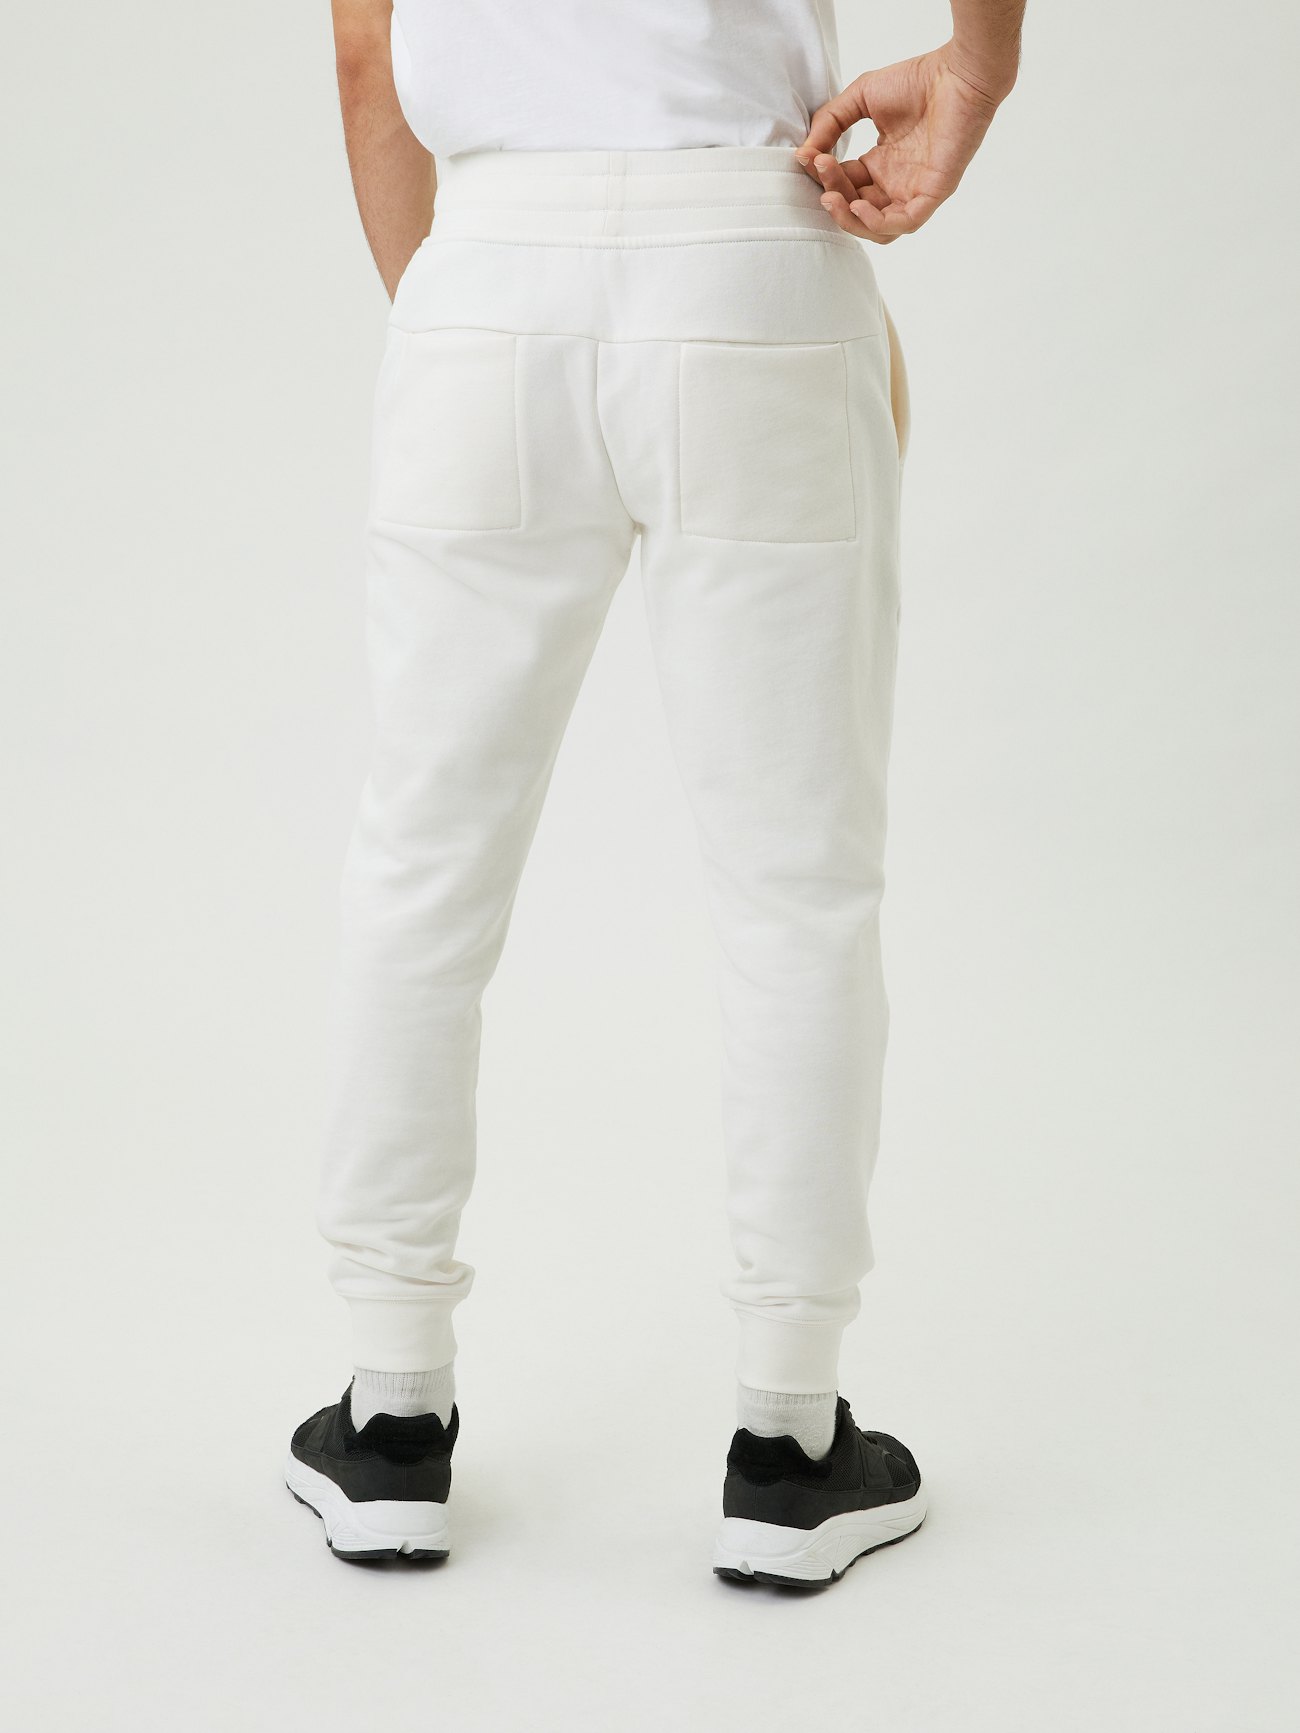 Centre Tapered Pants